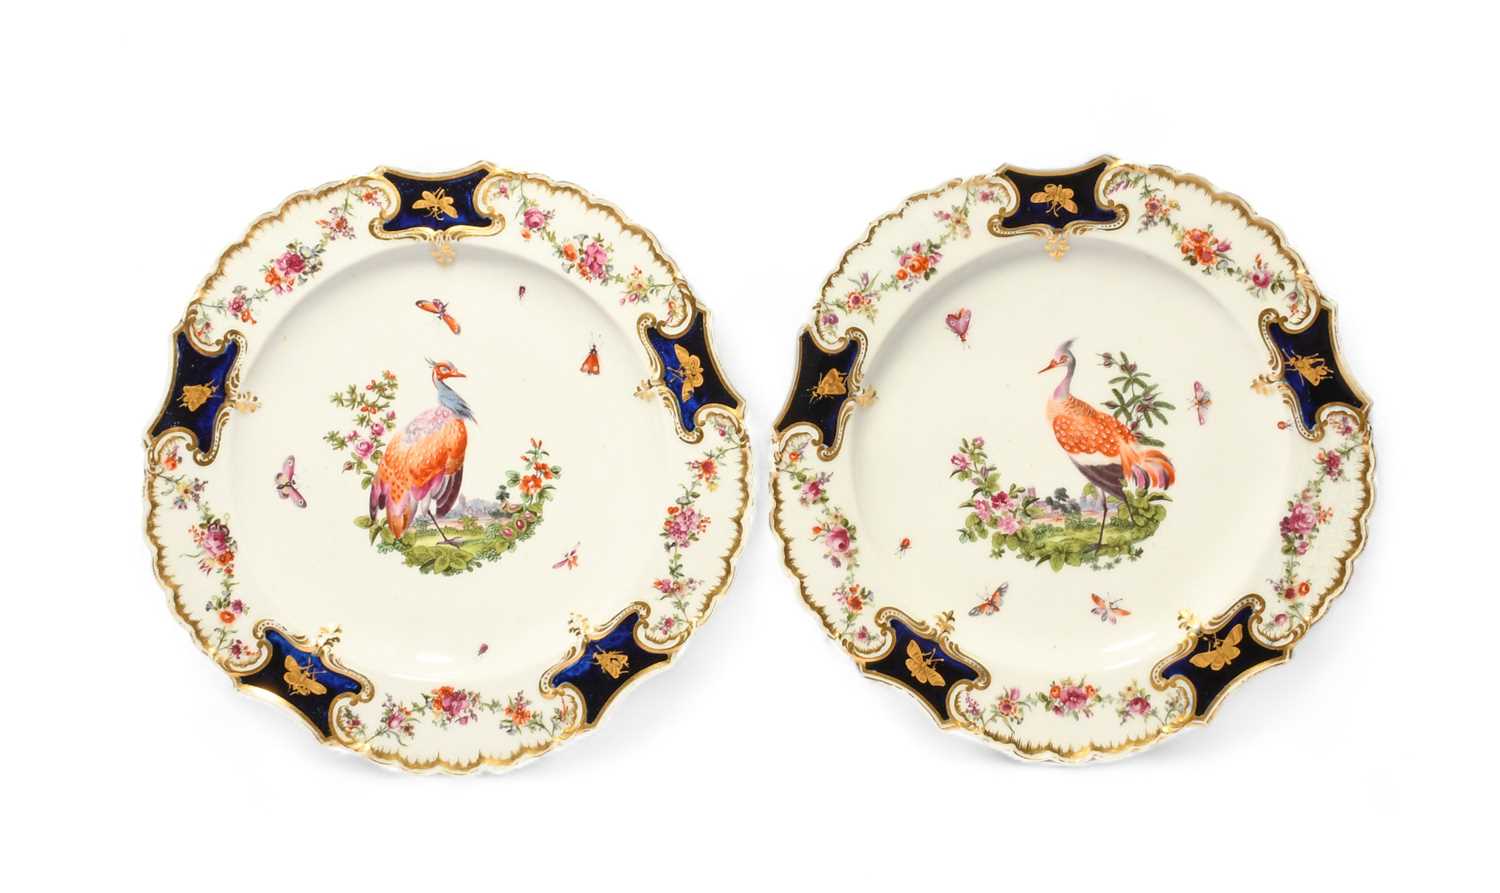 A pair of Chelsea plates of Mecklenburg-Strelitz type, c.1764, the moulded borders with flower